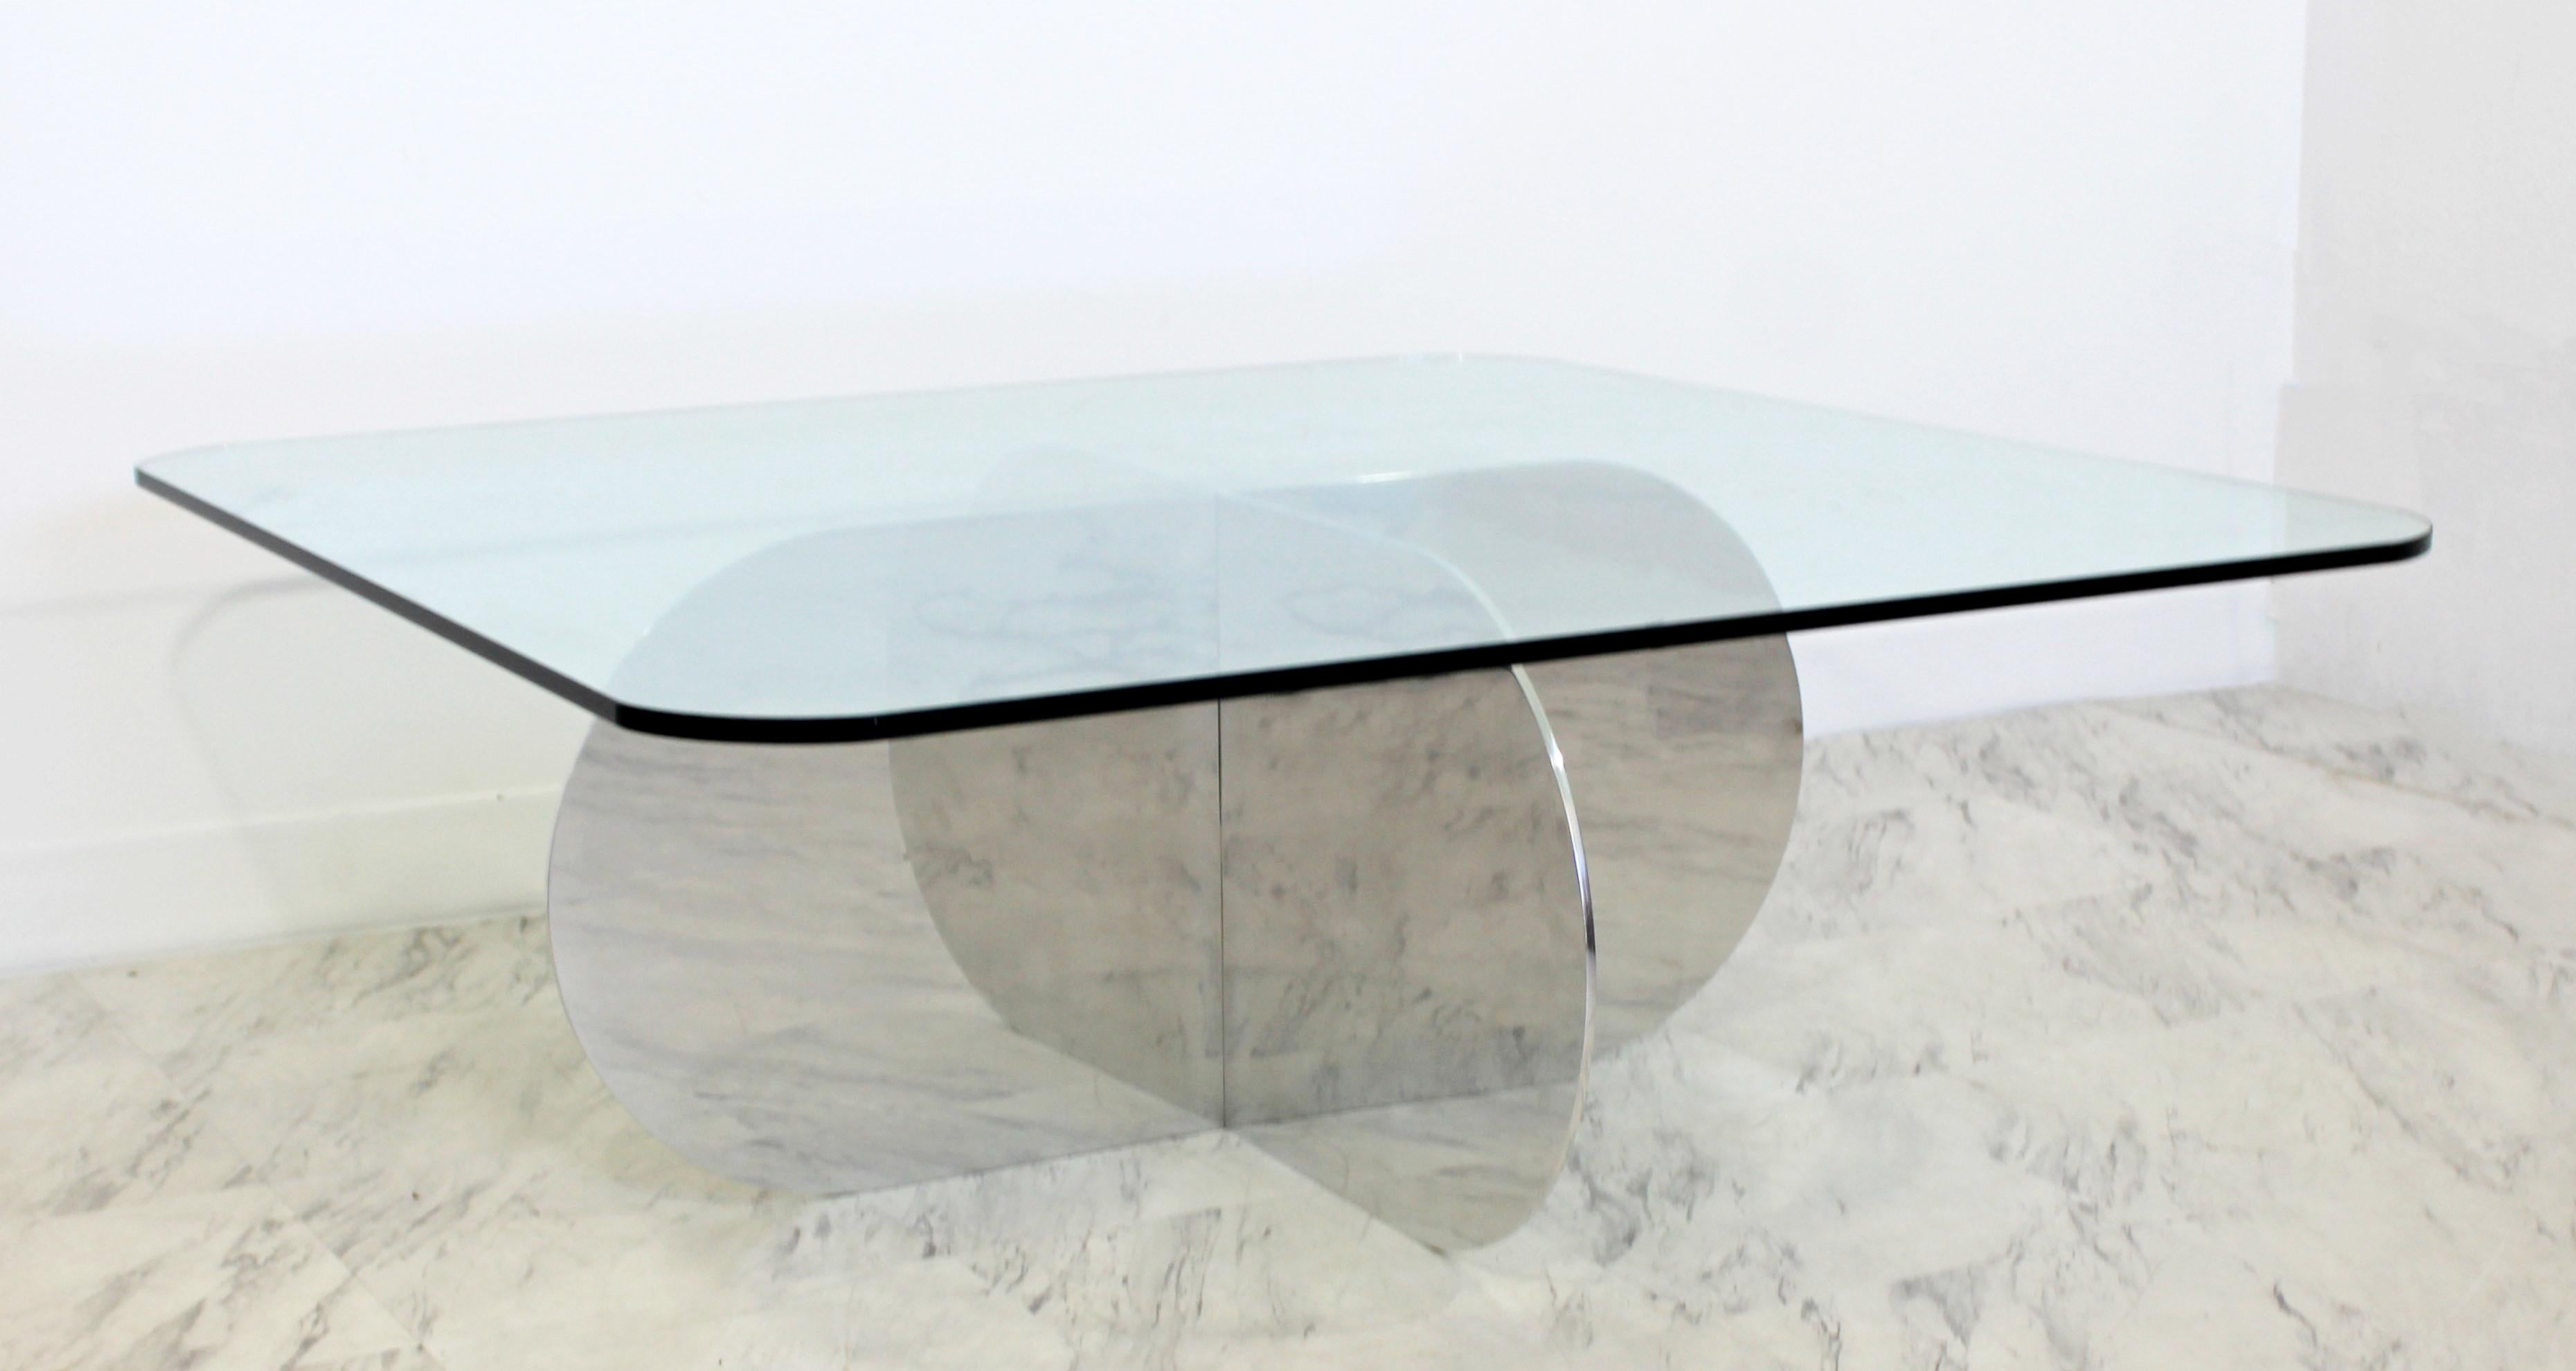 For your consideration is a stunning coffee table, with a glass top on a chrome base of thin, interlocking pieces, circa the 1970s. Attributed to Brueton or Pace. In excellent condition. The dimensions are 42